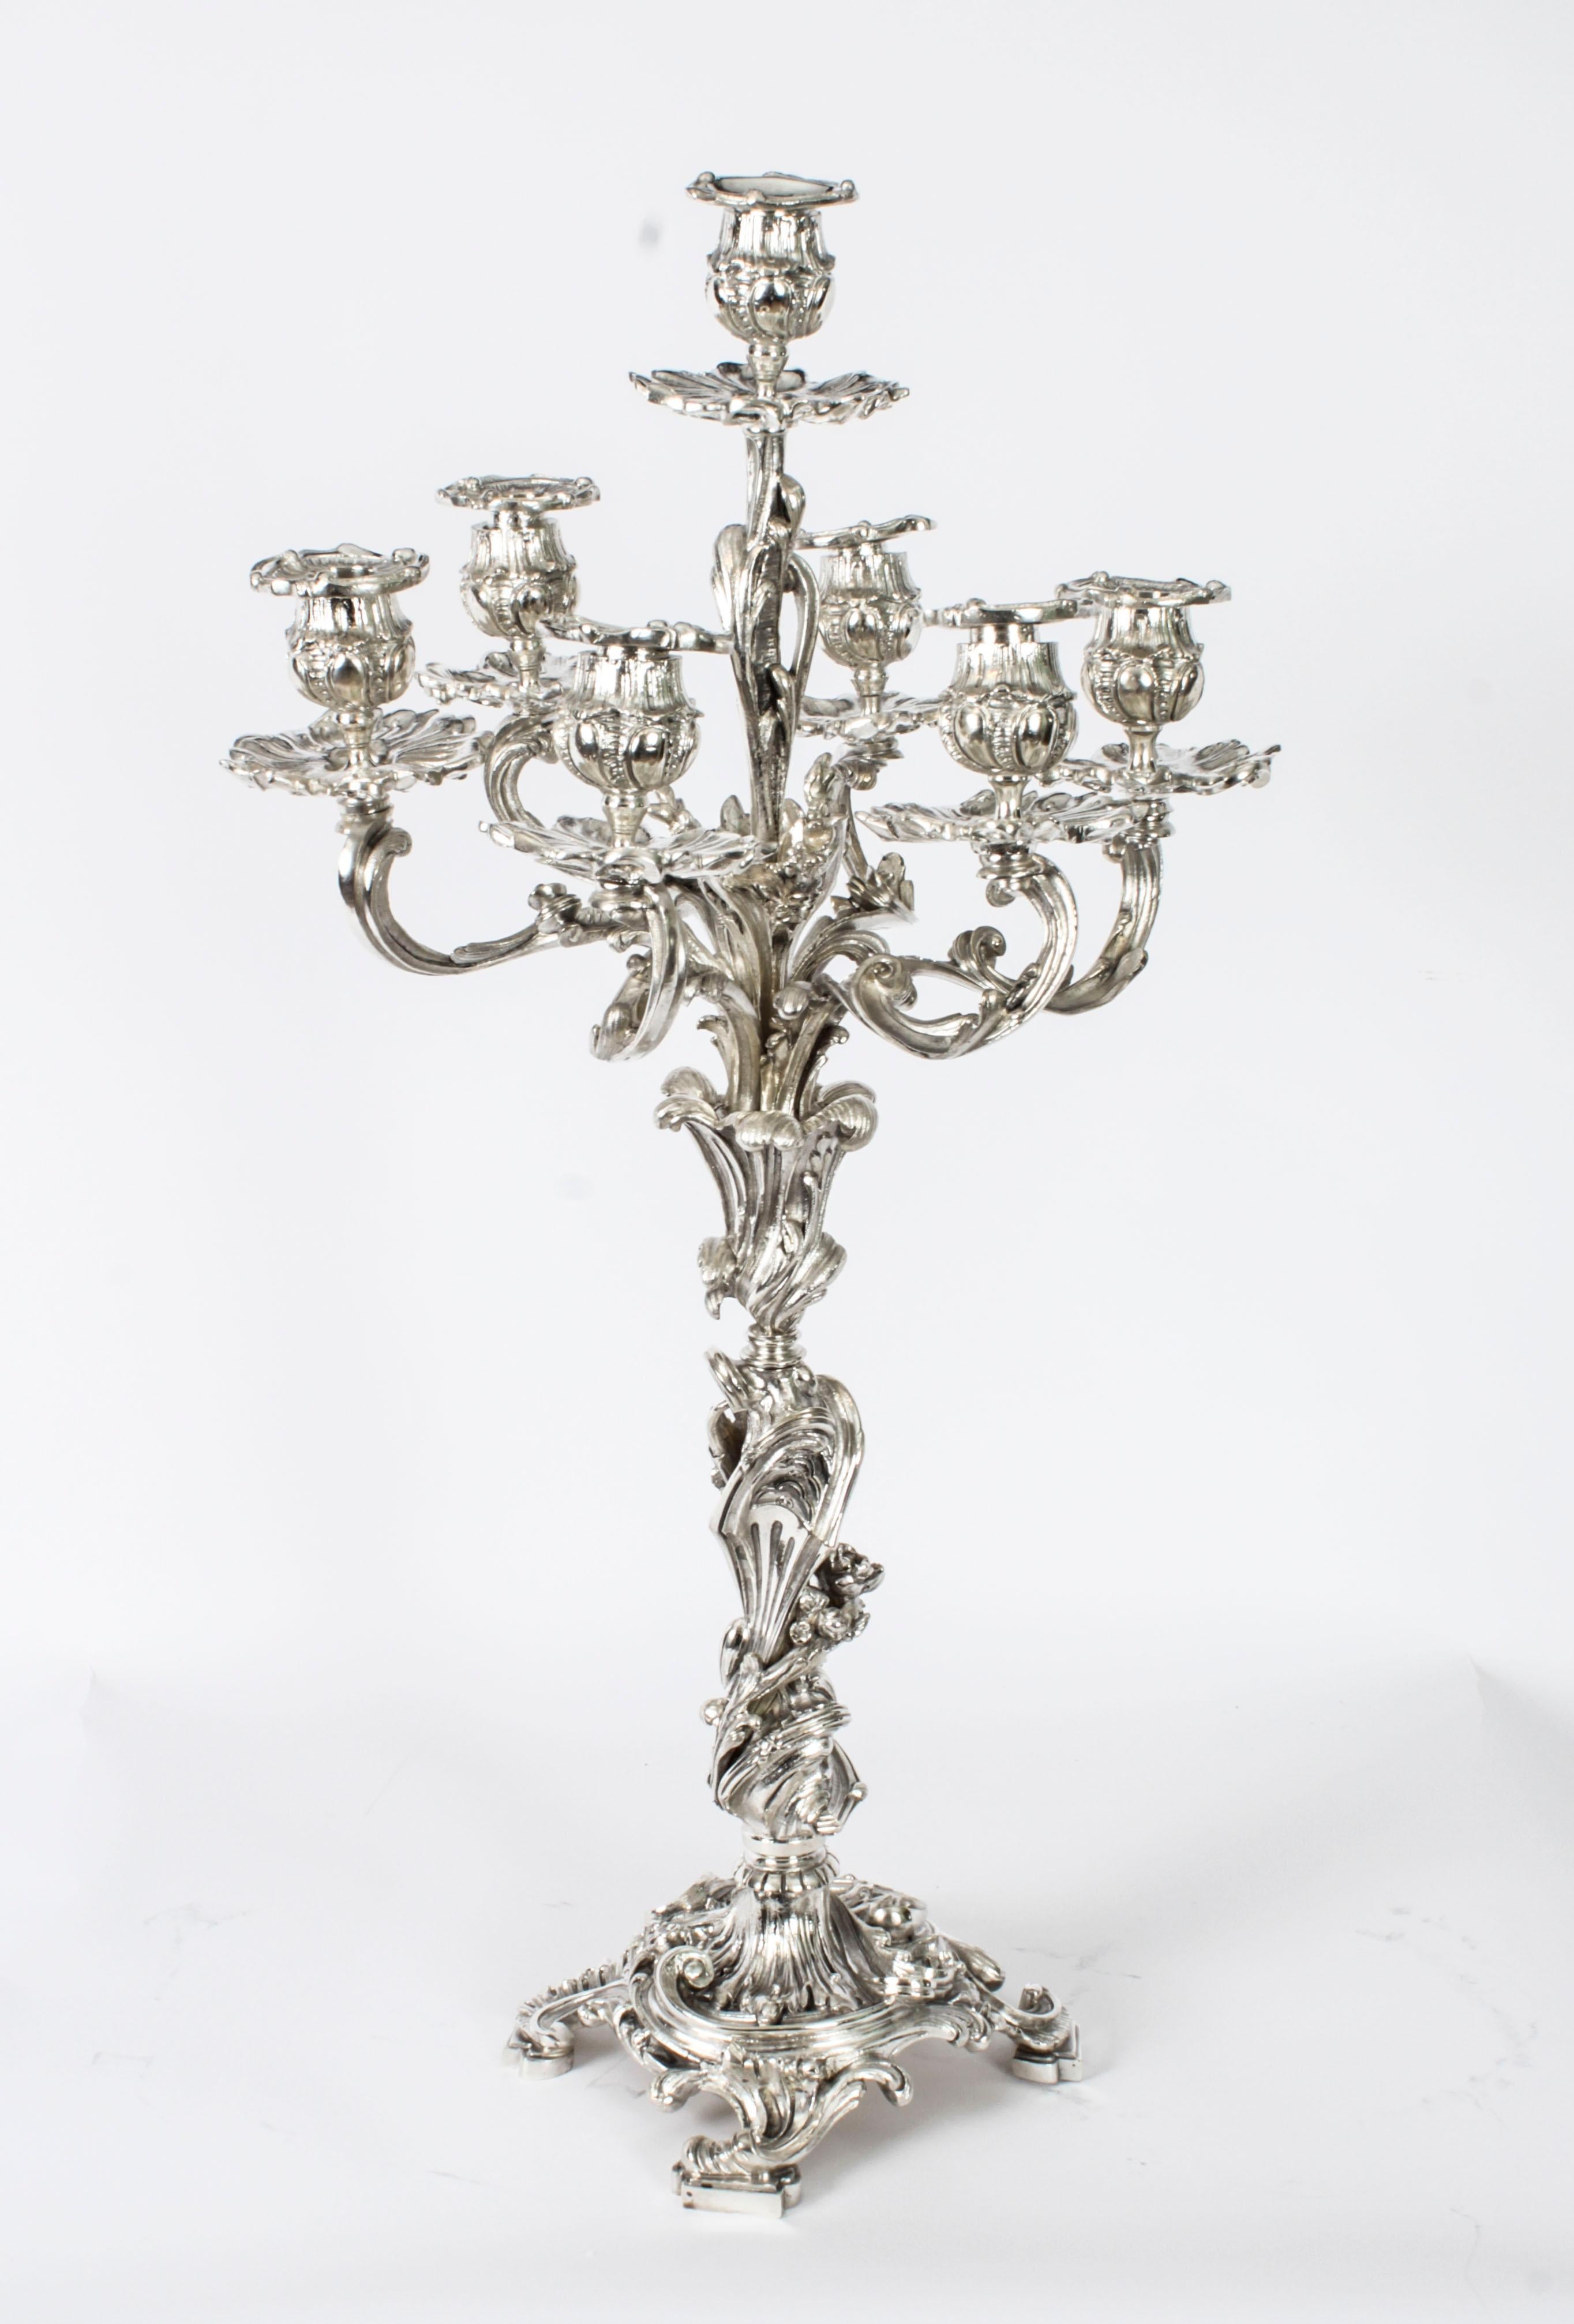 This is a momumental 2ft 6inch antique pair of French Rococo Revival silver plated seven light candelabra, circa 1920 in date.
 
The candelabra feature classical Rococo Revival stems and branches with exquisite acanthus decoration, they have